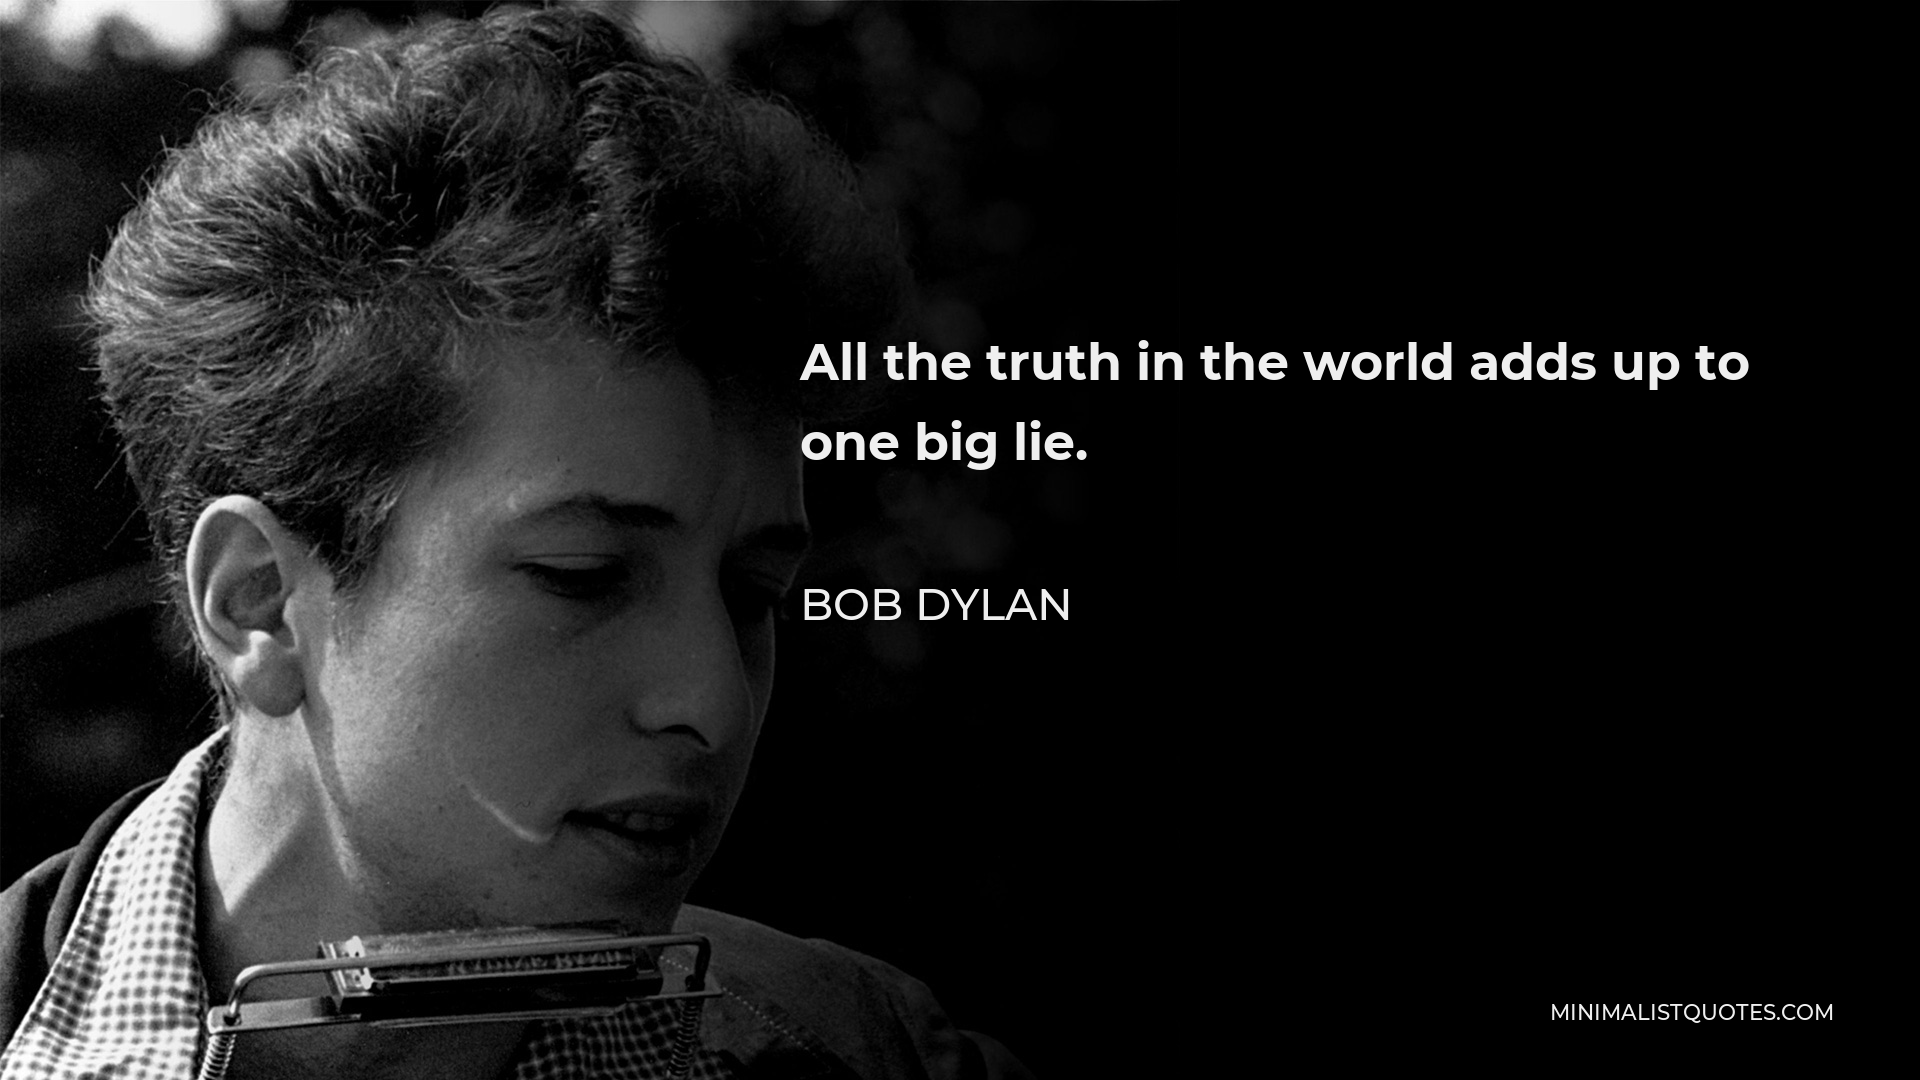 Bob Dylan Quote - All the truth in the world adds up to one big lie.